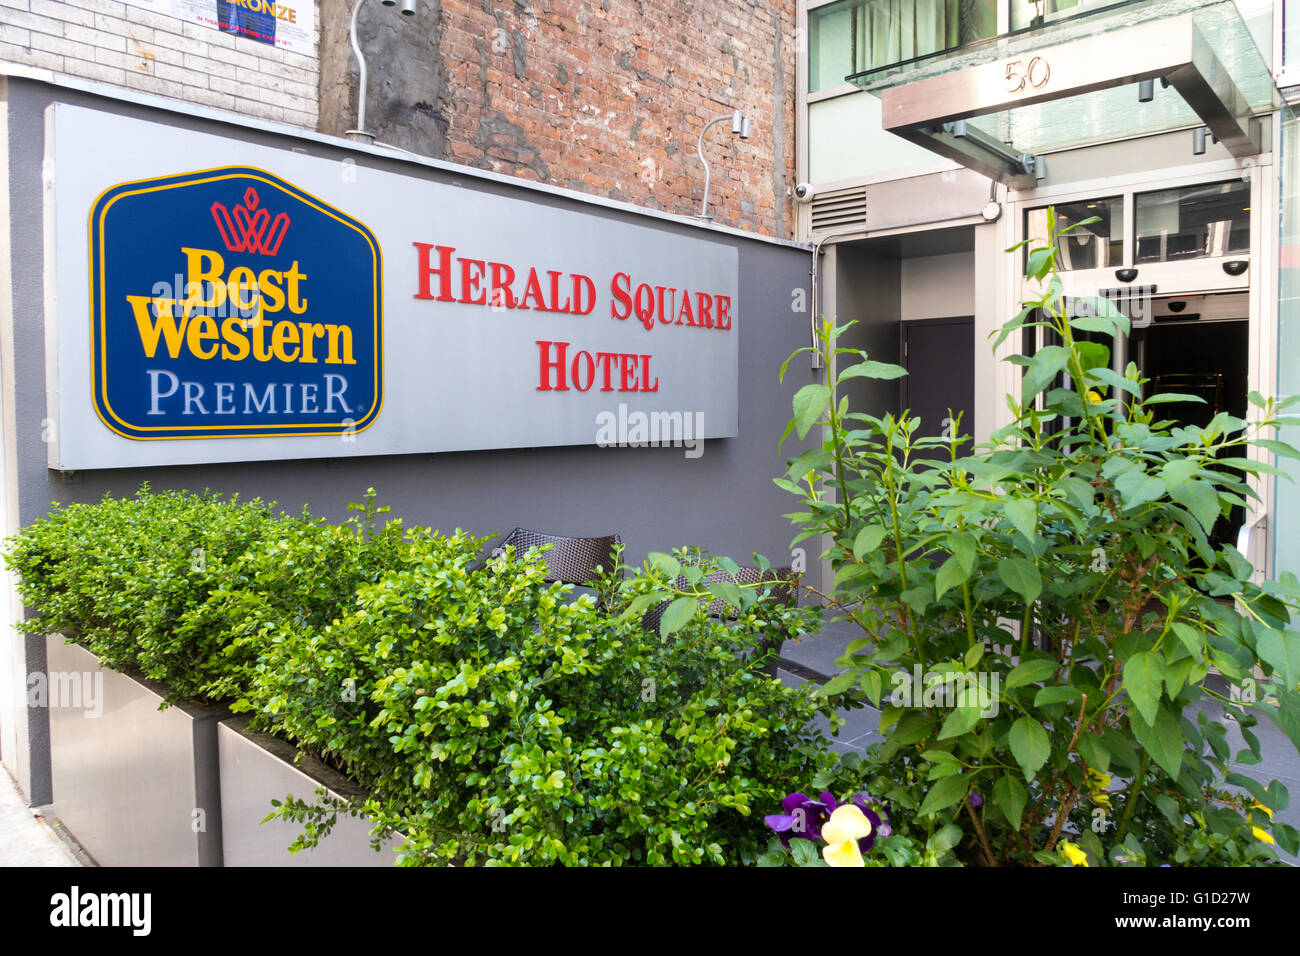 Best Western Premier Herald Square Hotel, NYC Stock Photo